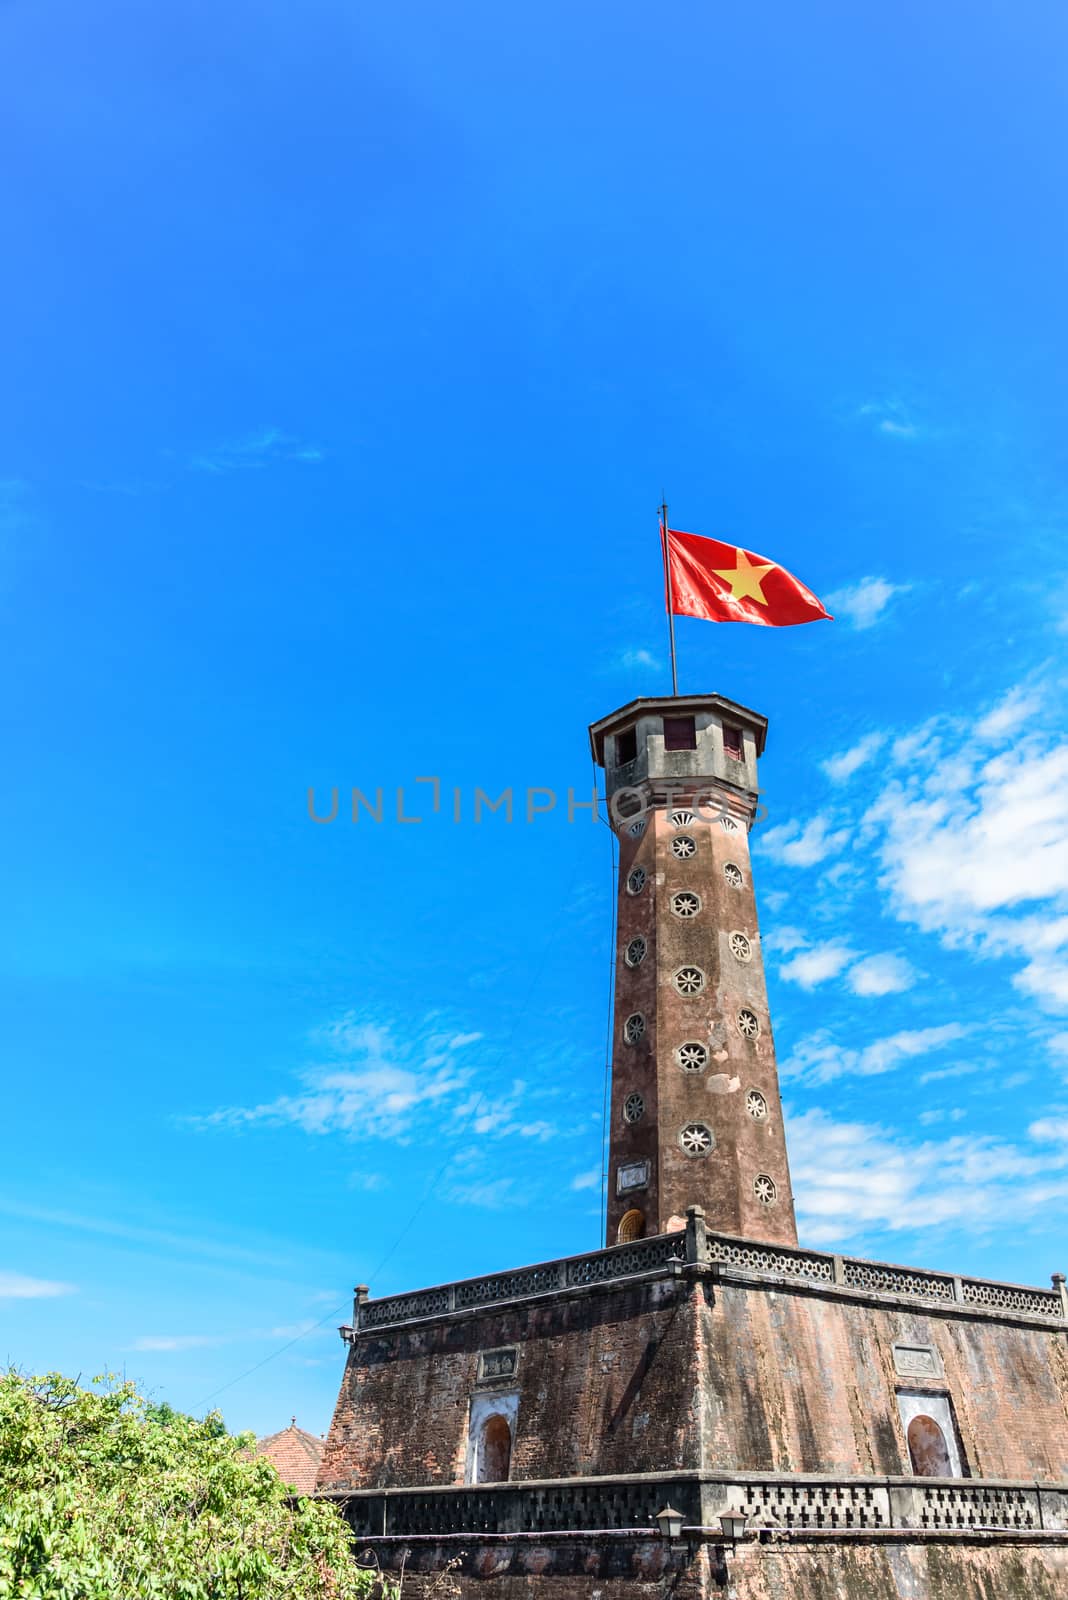 Hanoi flag tower with Vietnamese flag on top. This tower is one of the symbols of the city and part of the Hanoi Citadel, a World Heritage Site. A well known destination for tourist in Hanoi, Vietnam.